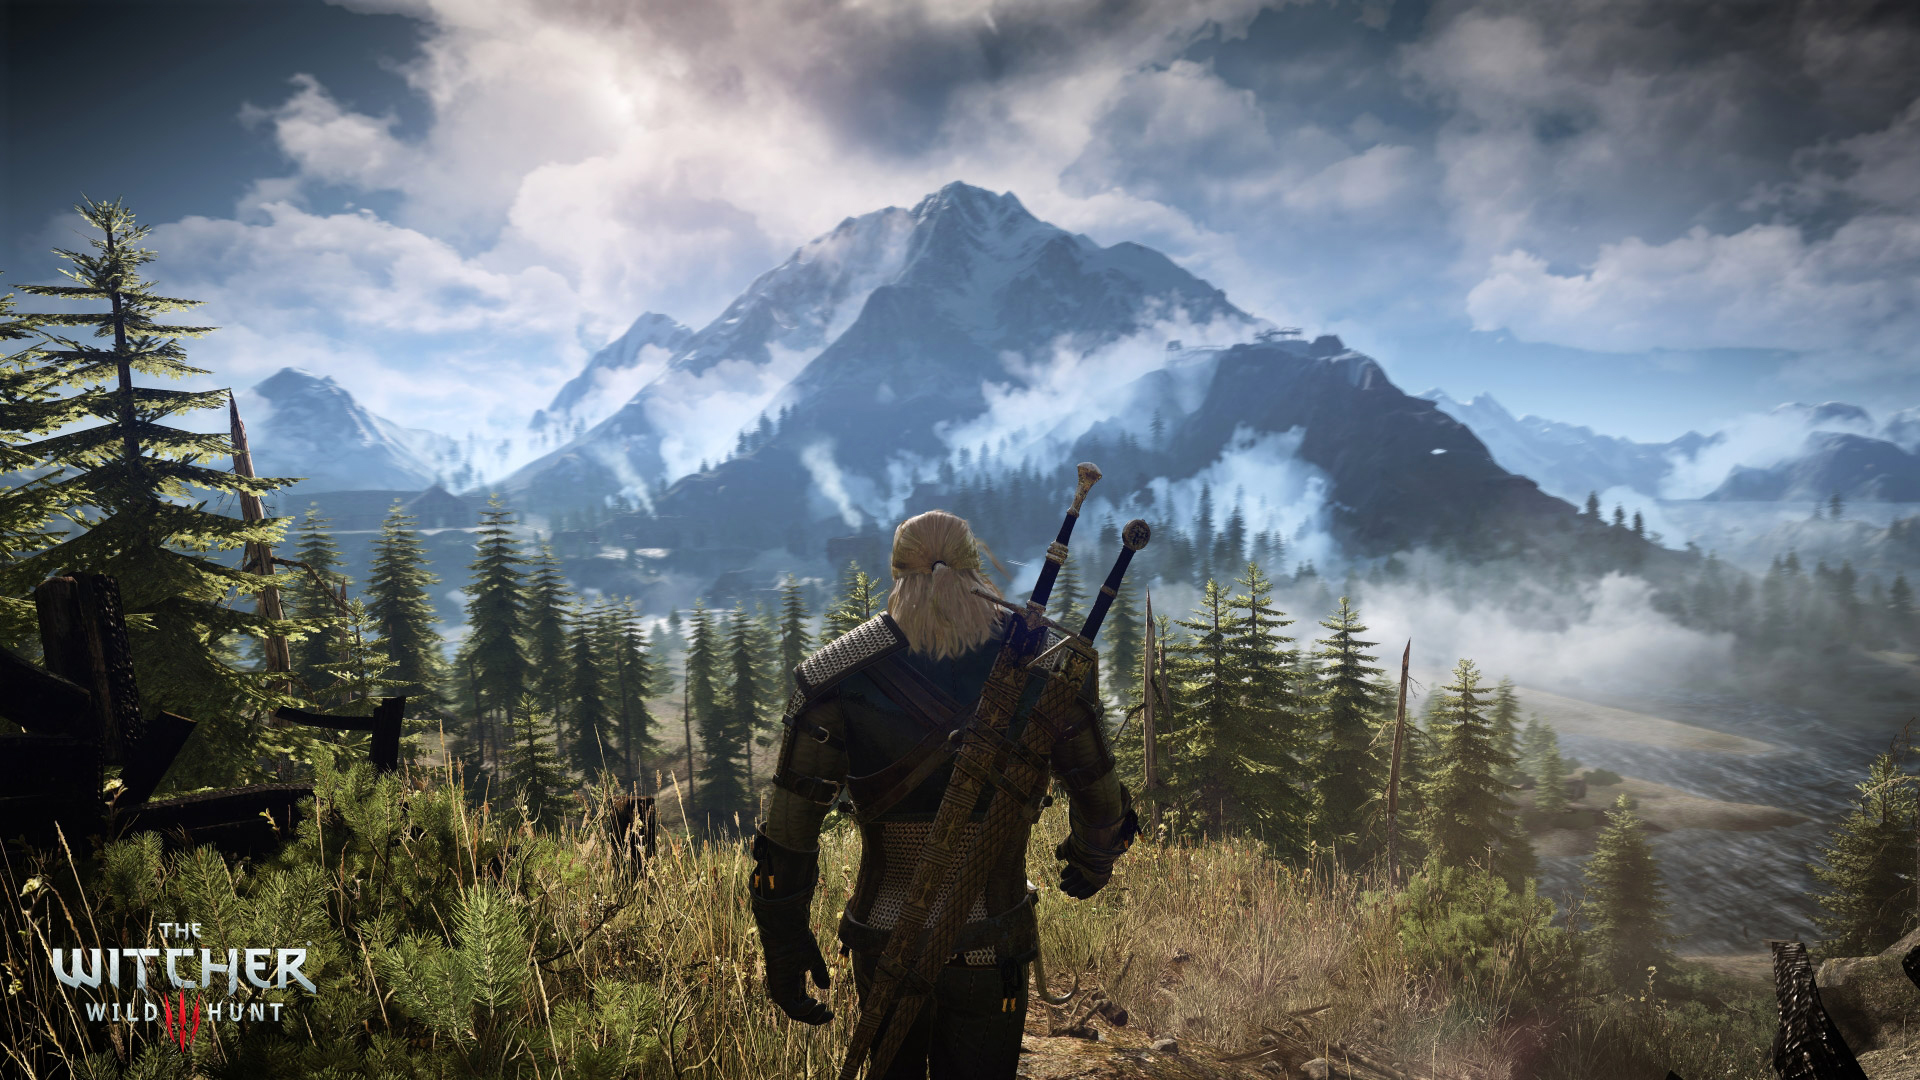 Free download The Witcher 3 Wild Hunt wallpaper [1920x1080] for your